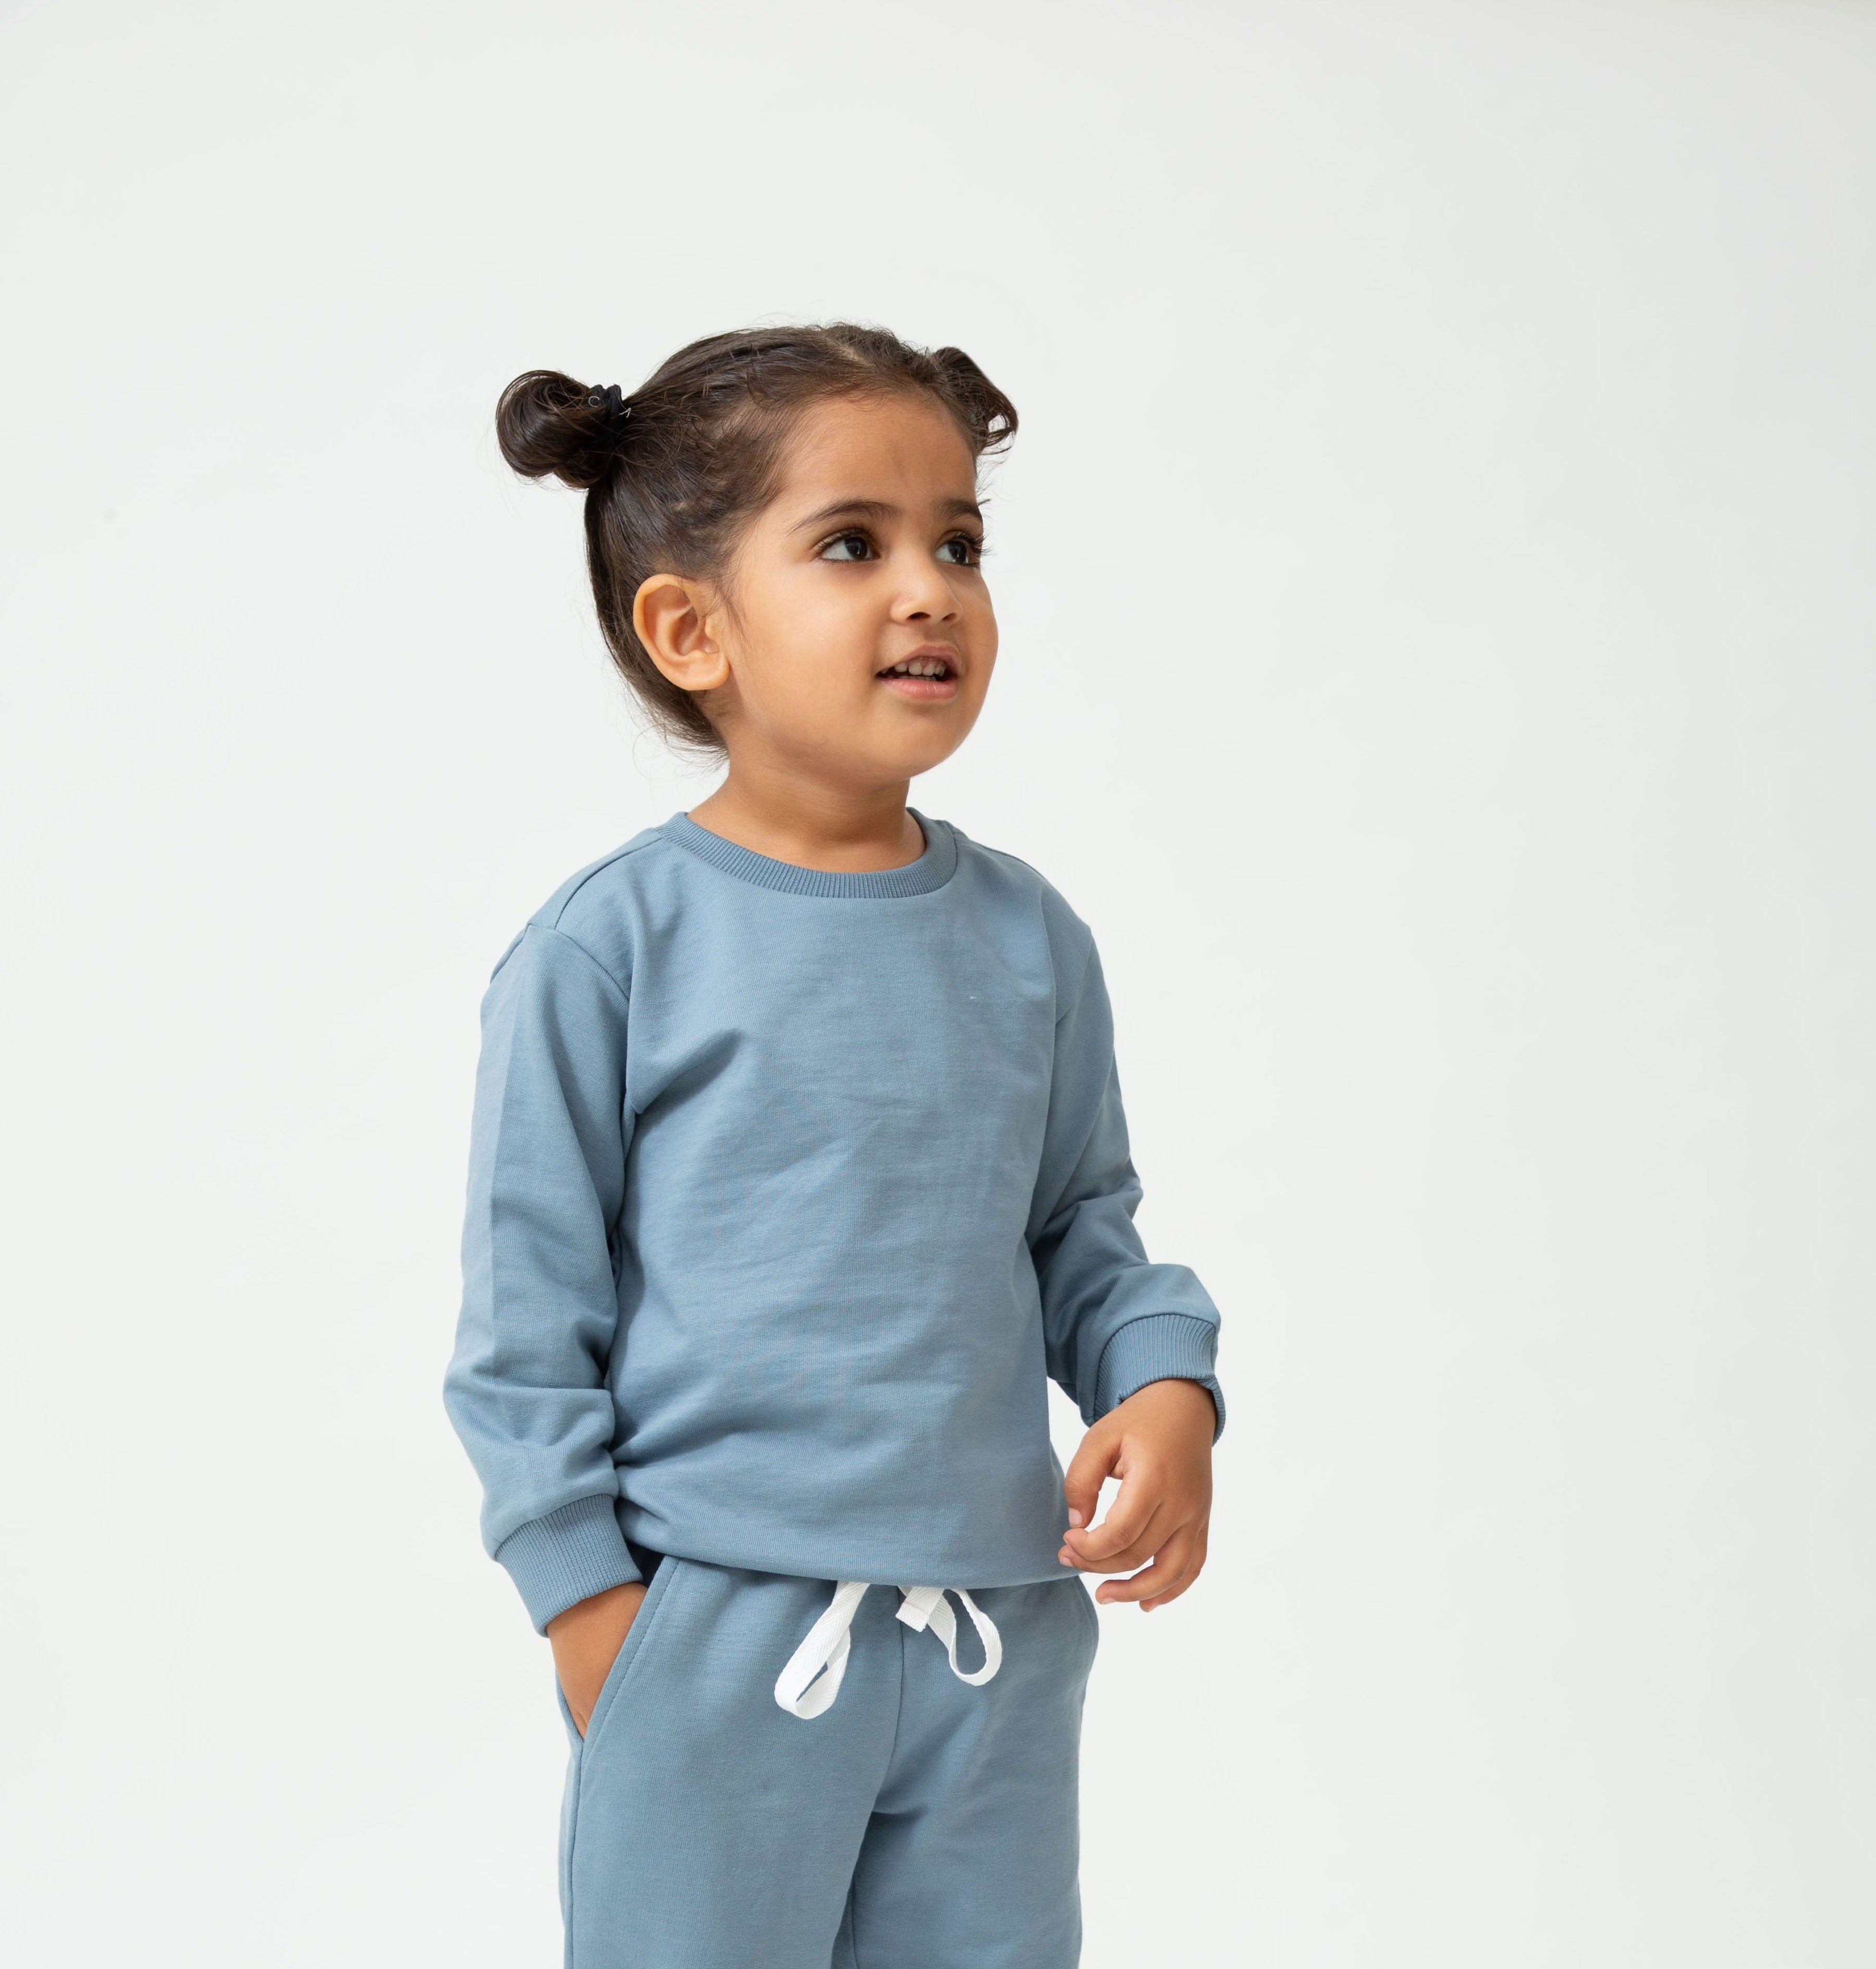 Saltpetre organic, unisex kids wear for boys and girls in blue color. Organic cotton sweatshirt 